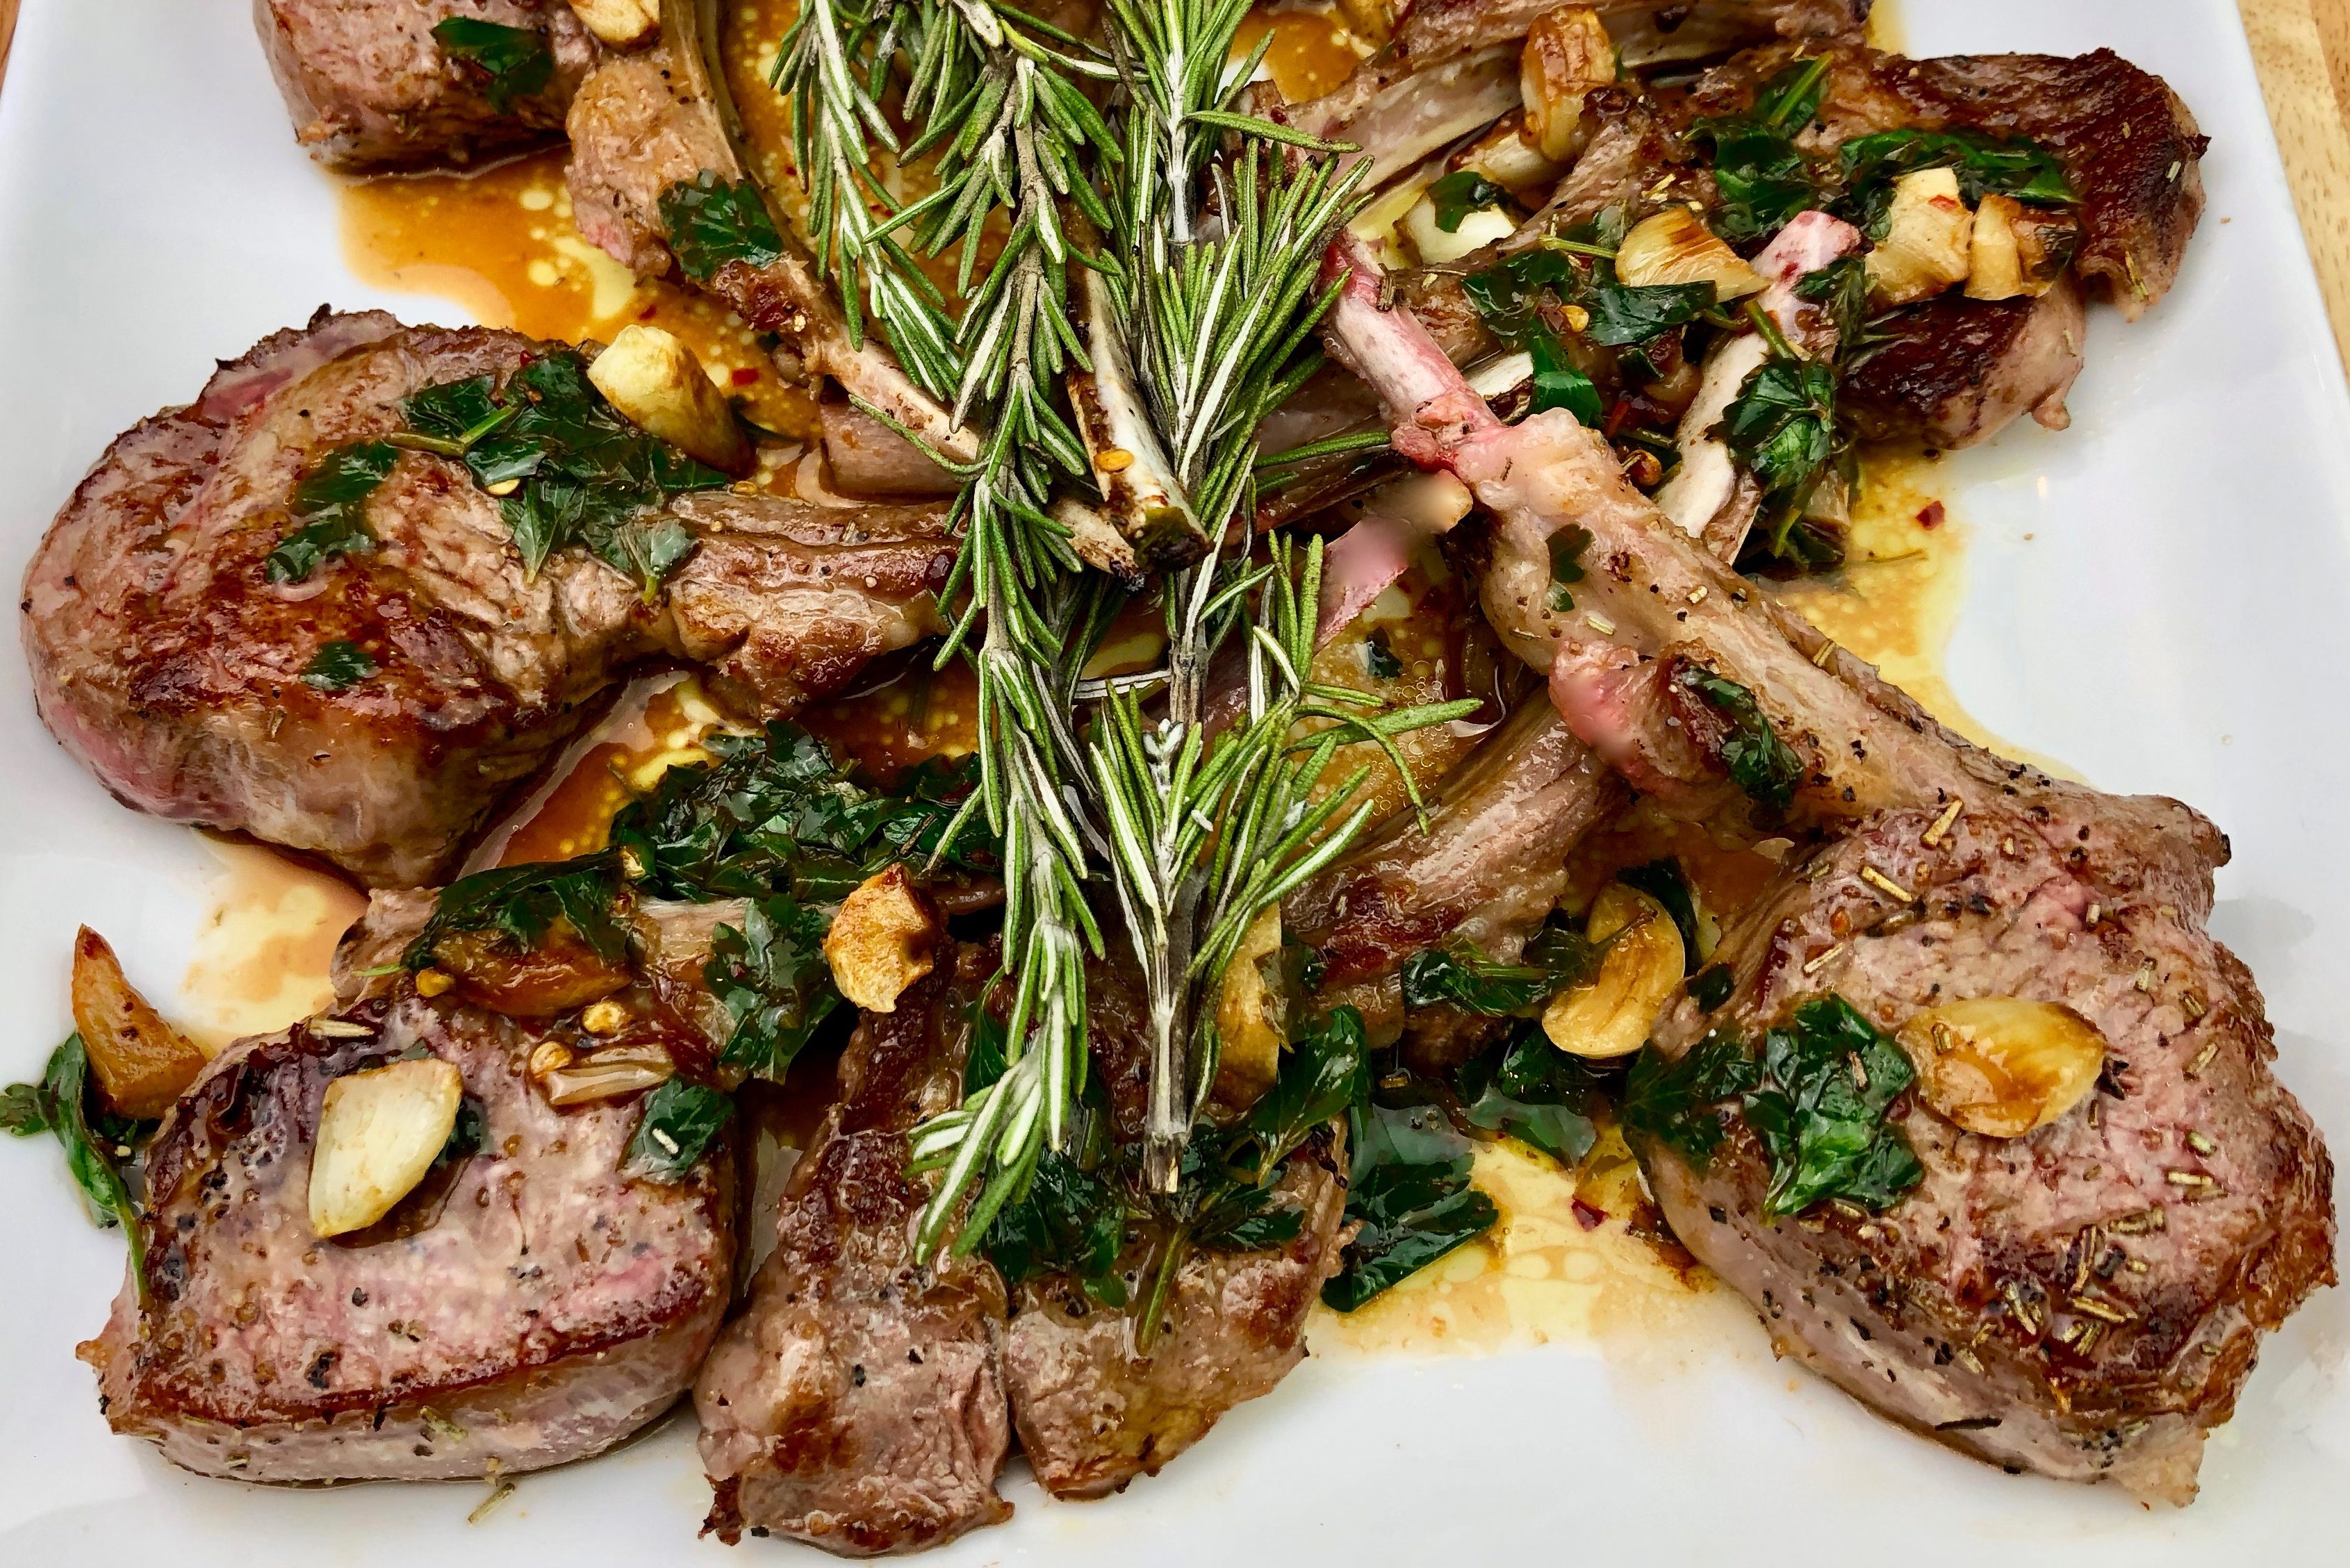 Sizzled Lamb Chops with Browned Garlic Cloves